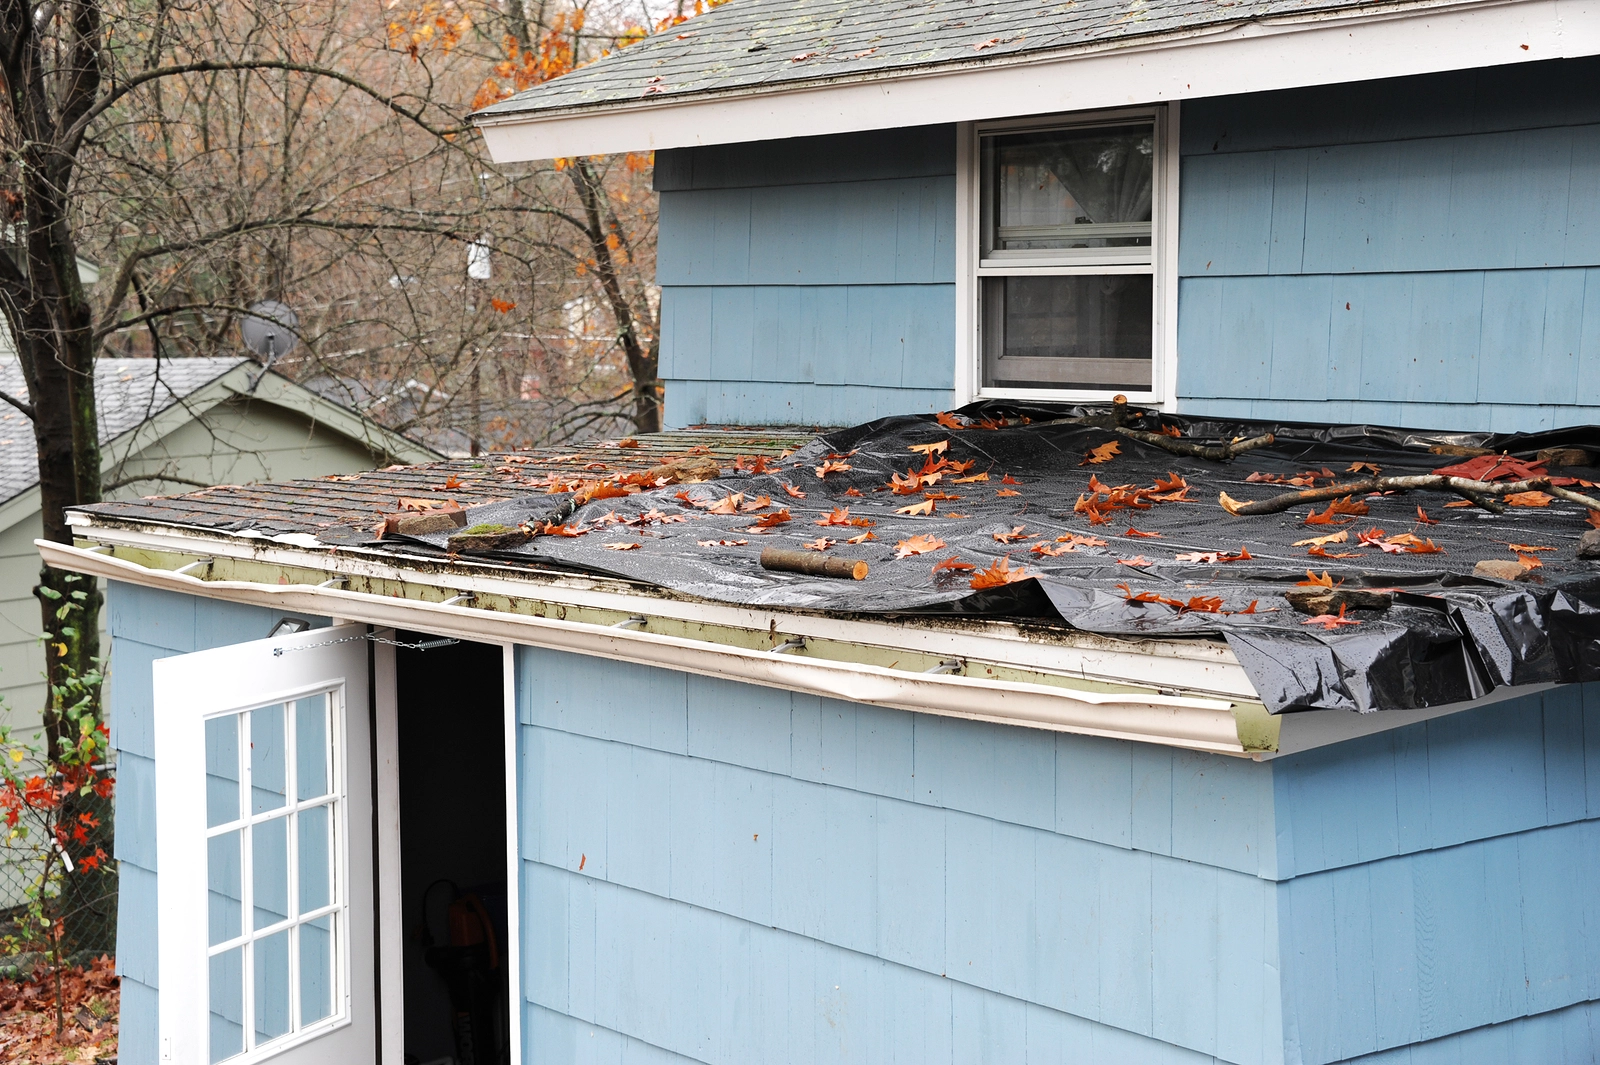 Residential roof damaged after a storm covered in plastic.